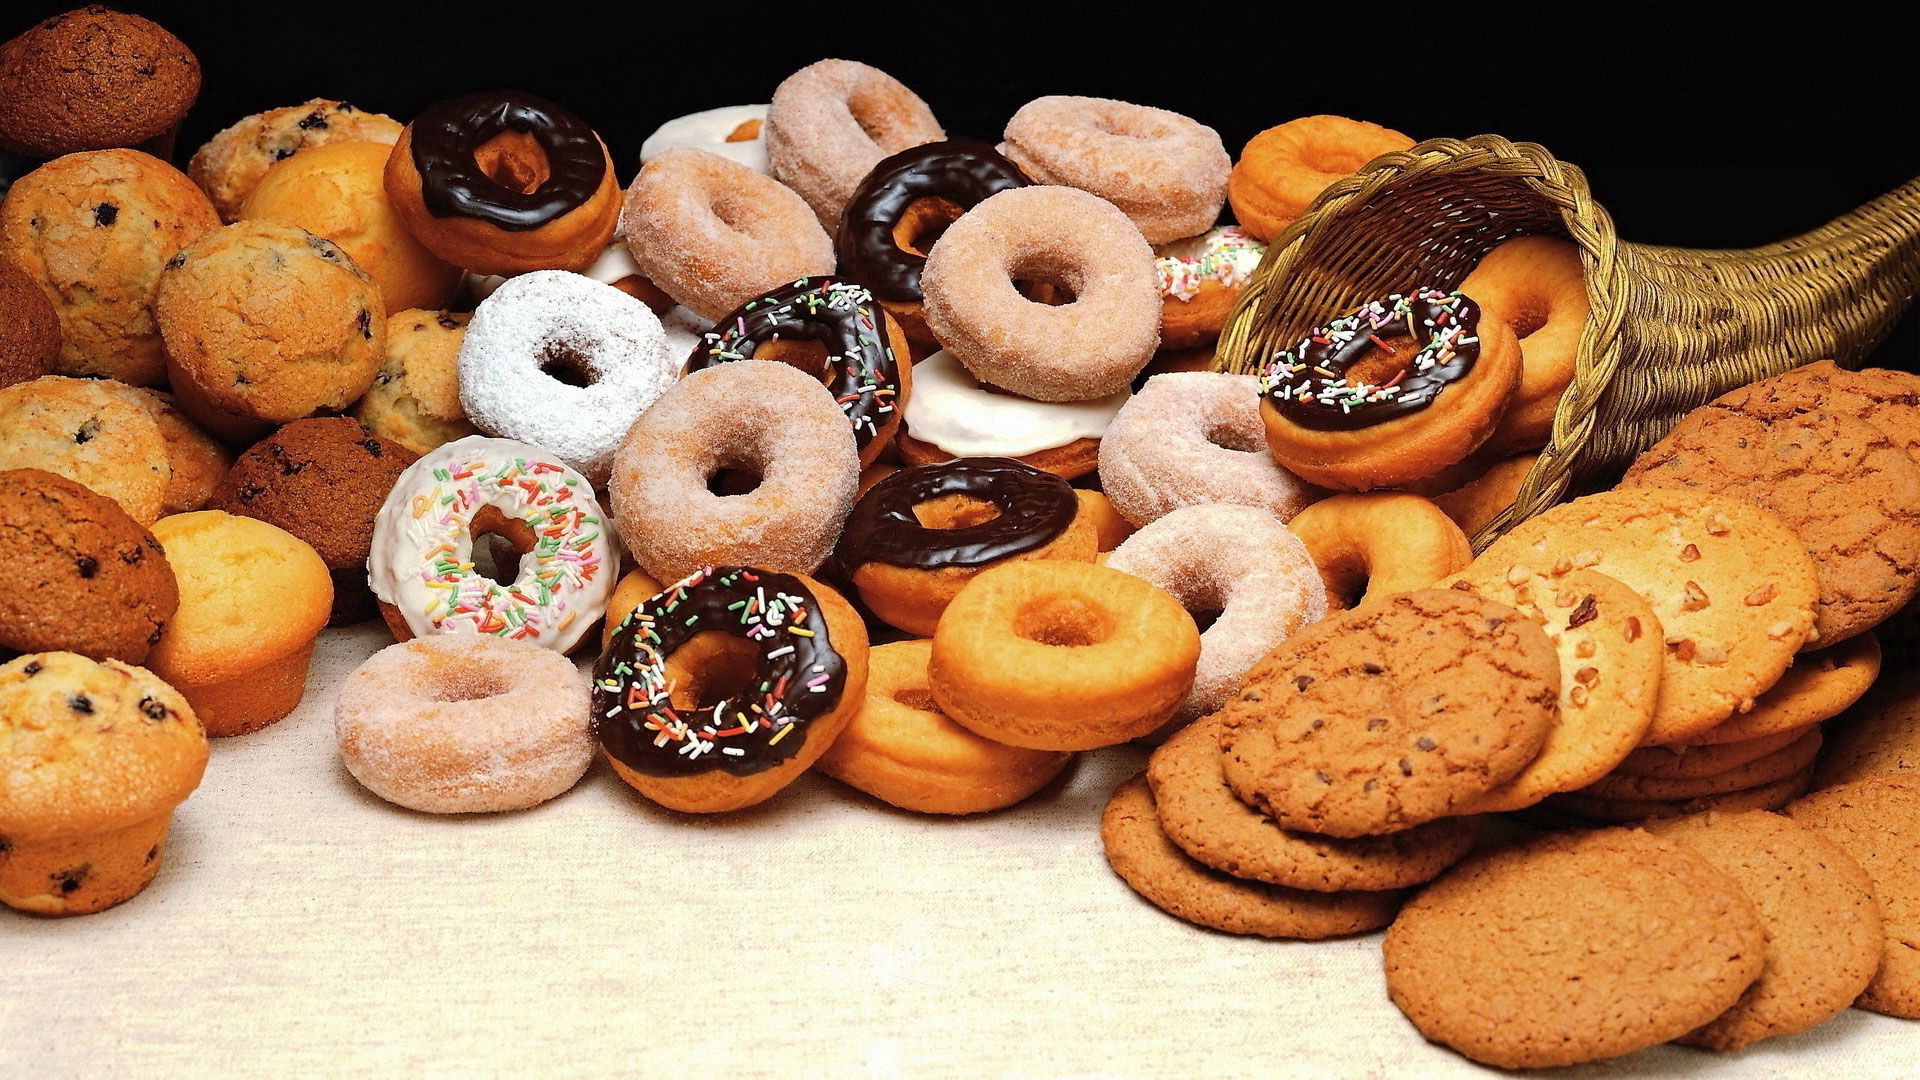 86503 Screensavers and Wallpapers Donuts for phone. Download food, cookies, assorted, bakery products, baking, donuts, diversity, variety pictures for free